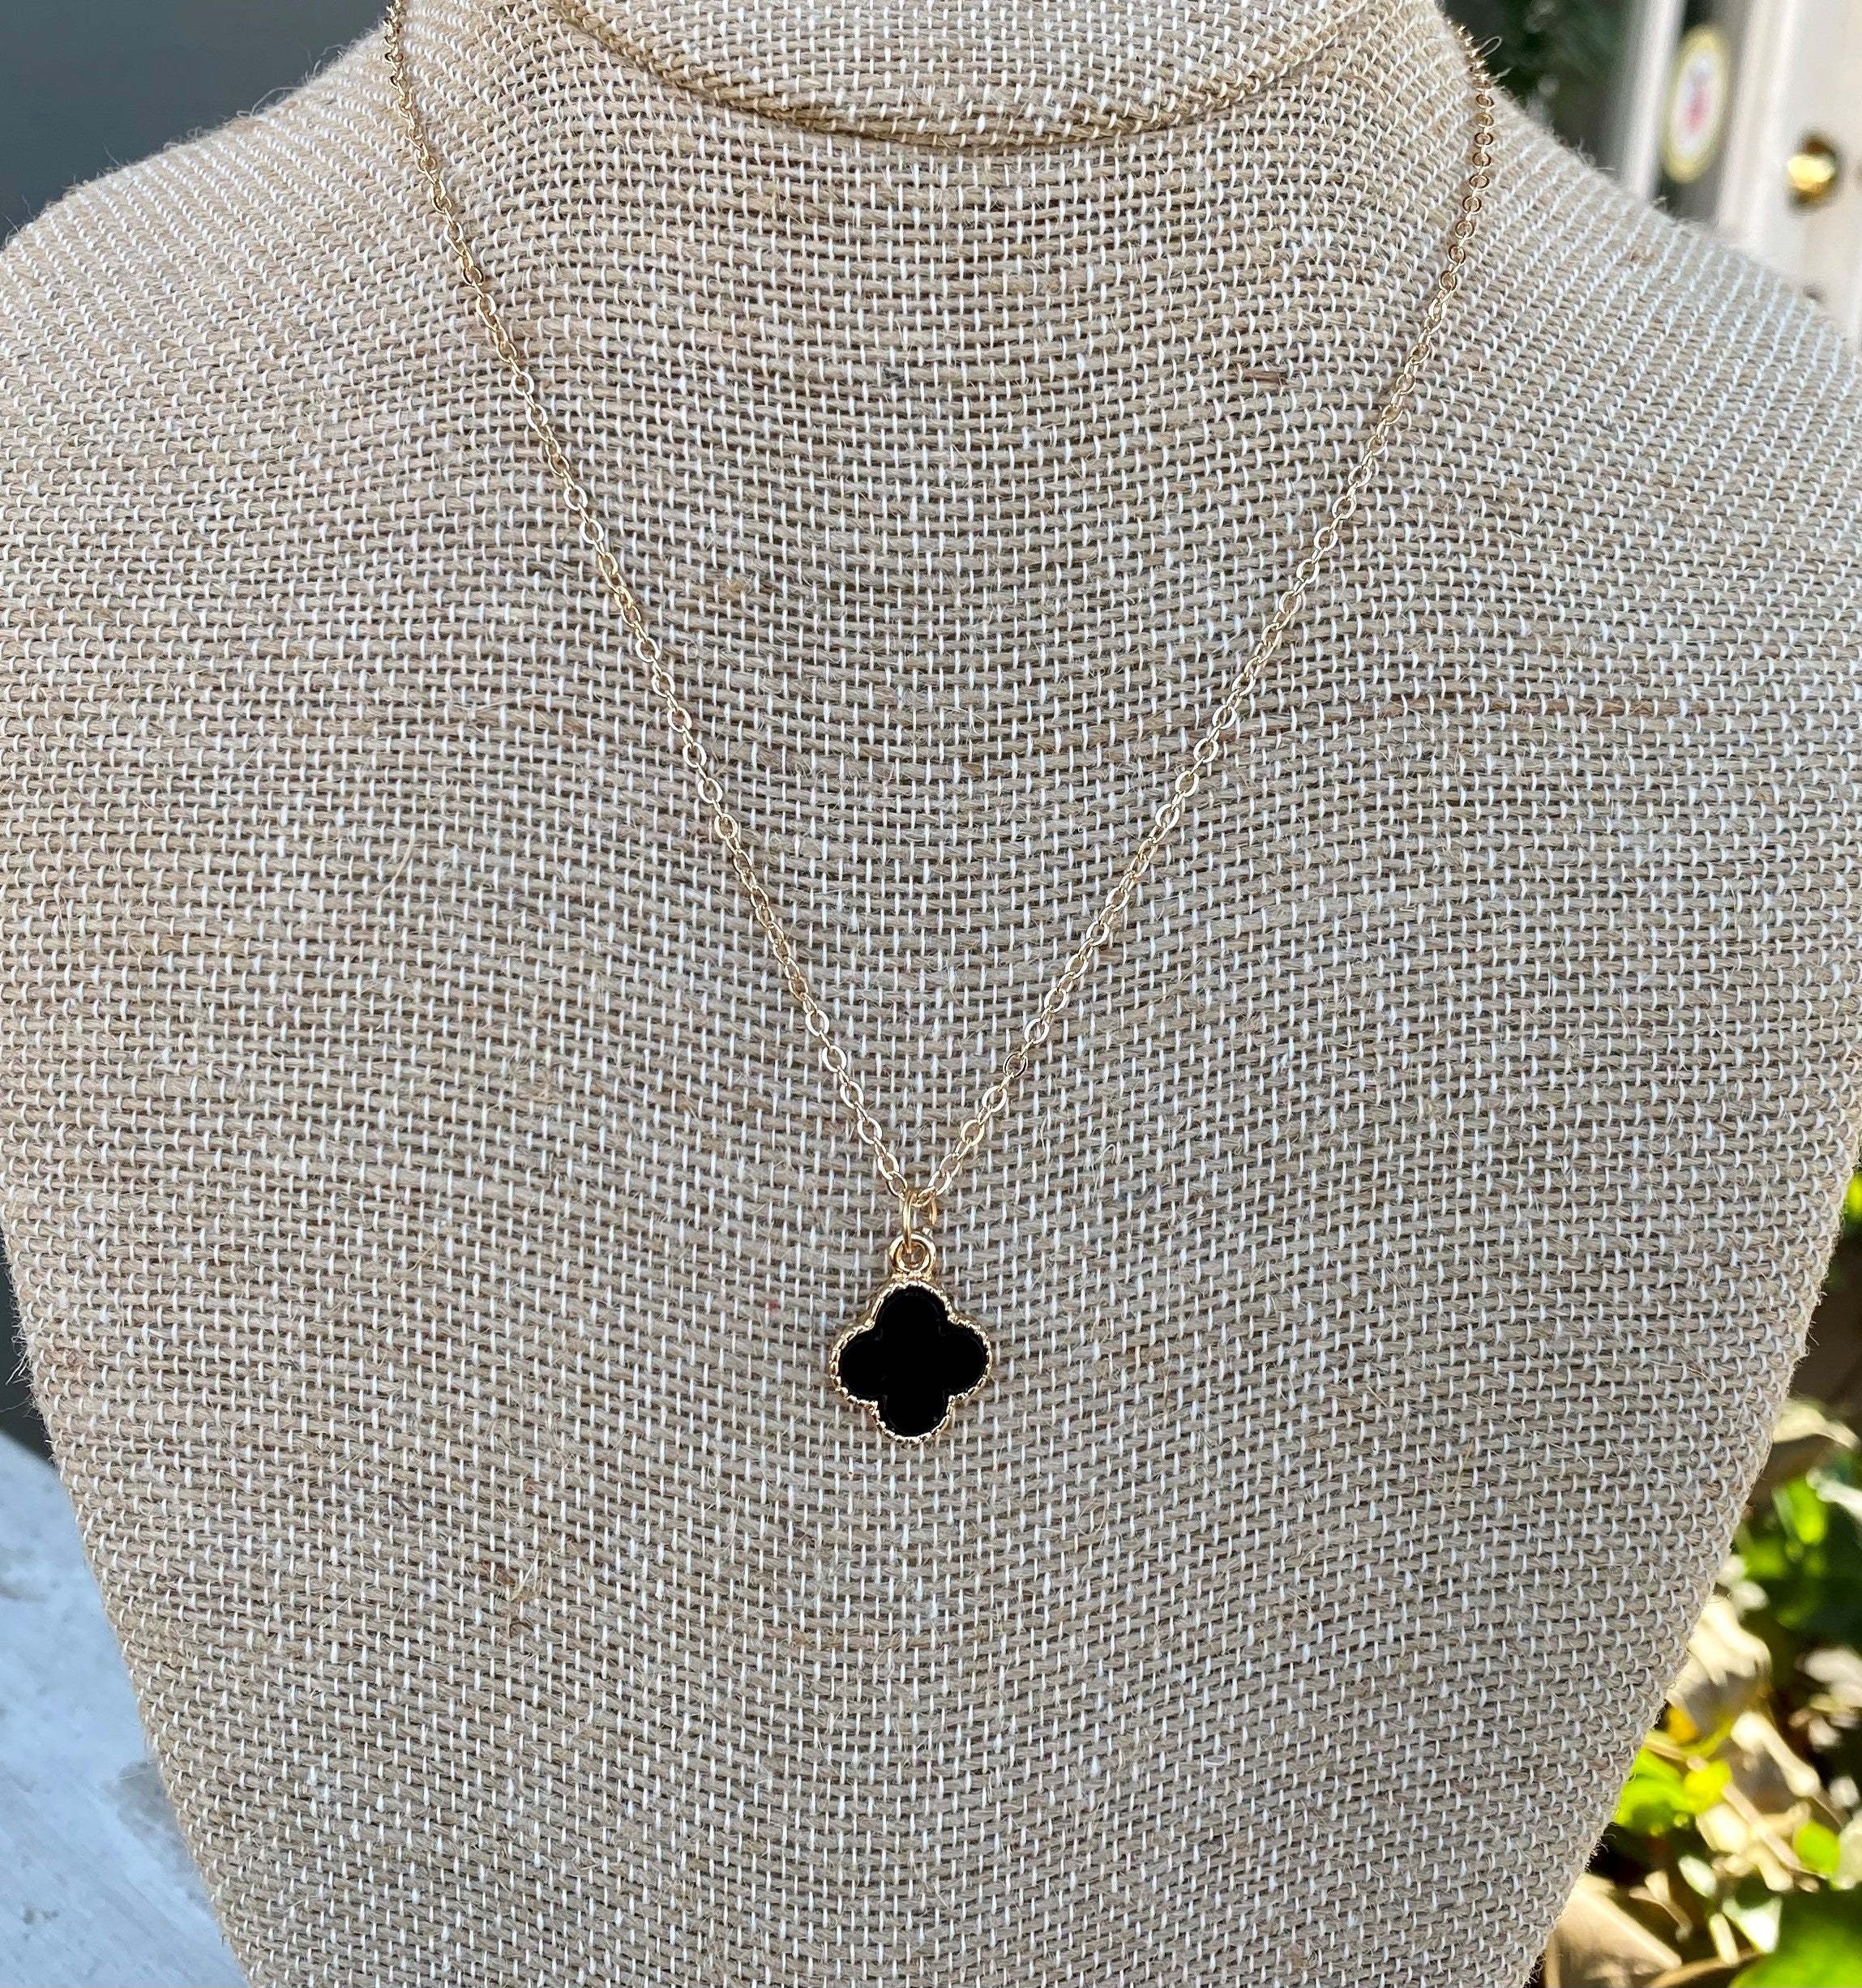 These are beautiful gold necklace with colored clover-shaped pendants. The gold chain is dainty and the pendant is trimmed in gold. Such a sweet necklace!  Length is approximately 18-21"